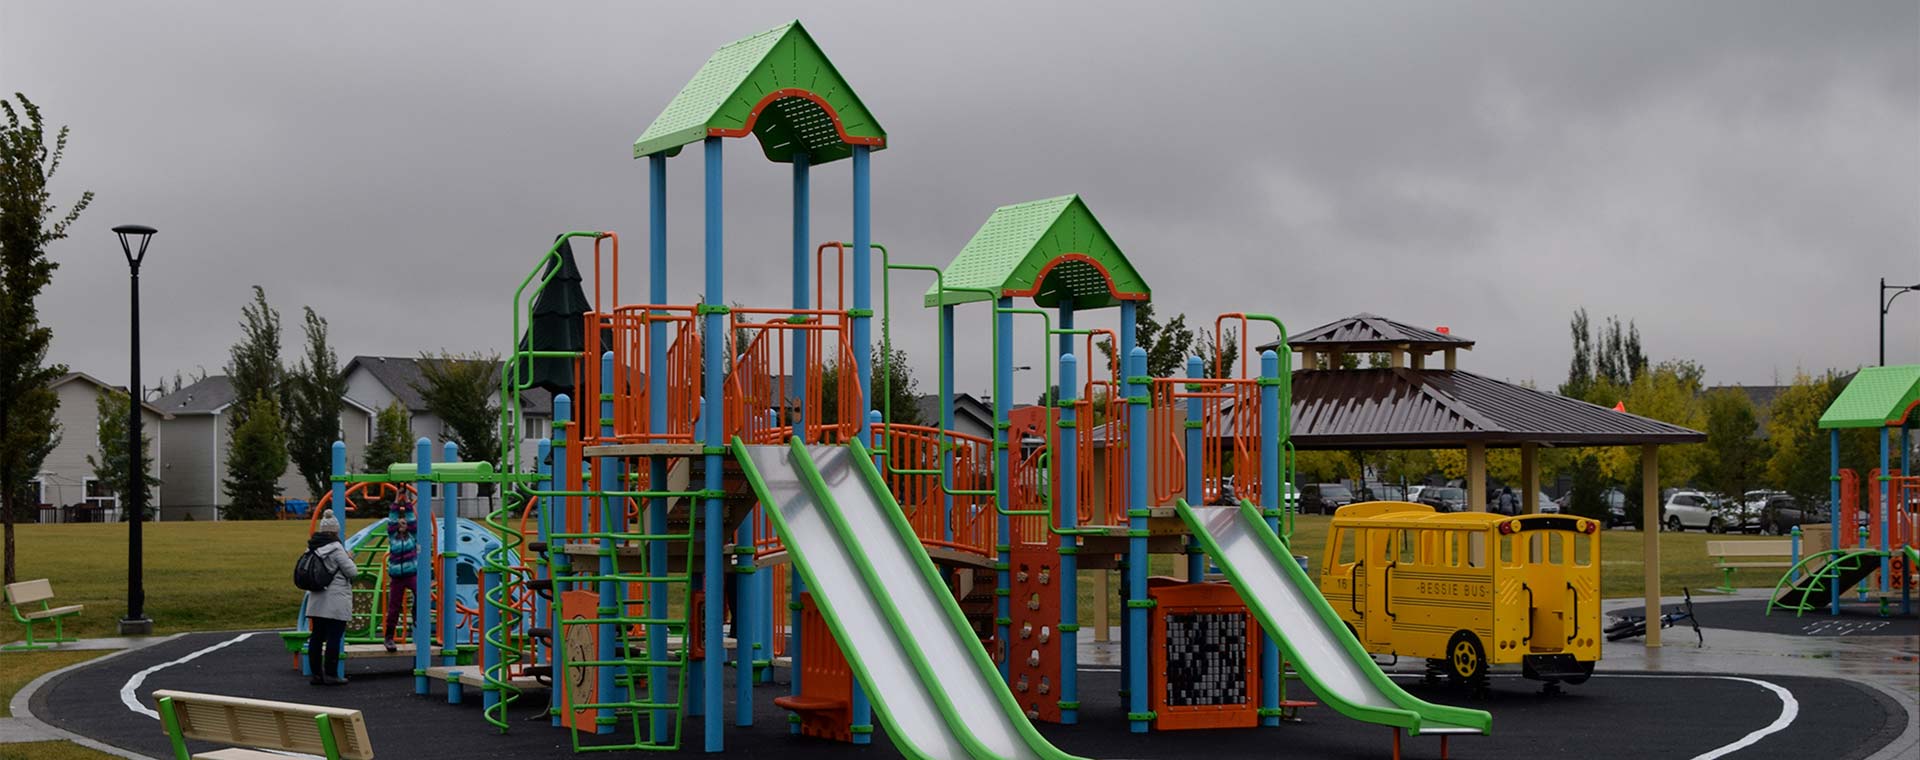 A large playground, with two slides in West Edmonton. The playground is red, blue, green and yellow. There is a gazebo just behind the playground